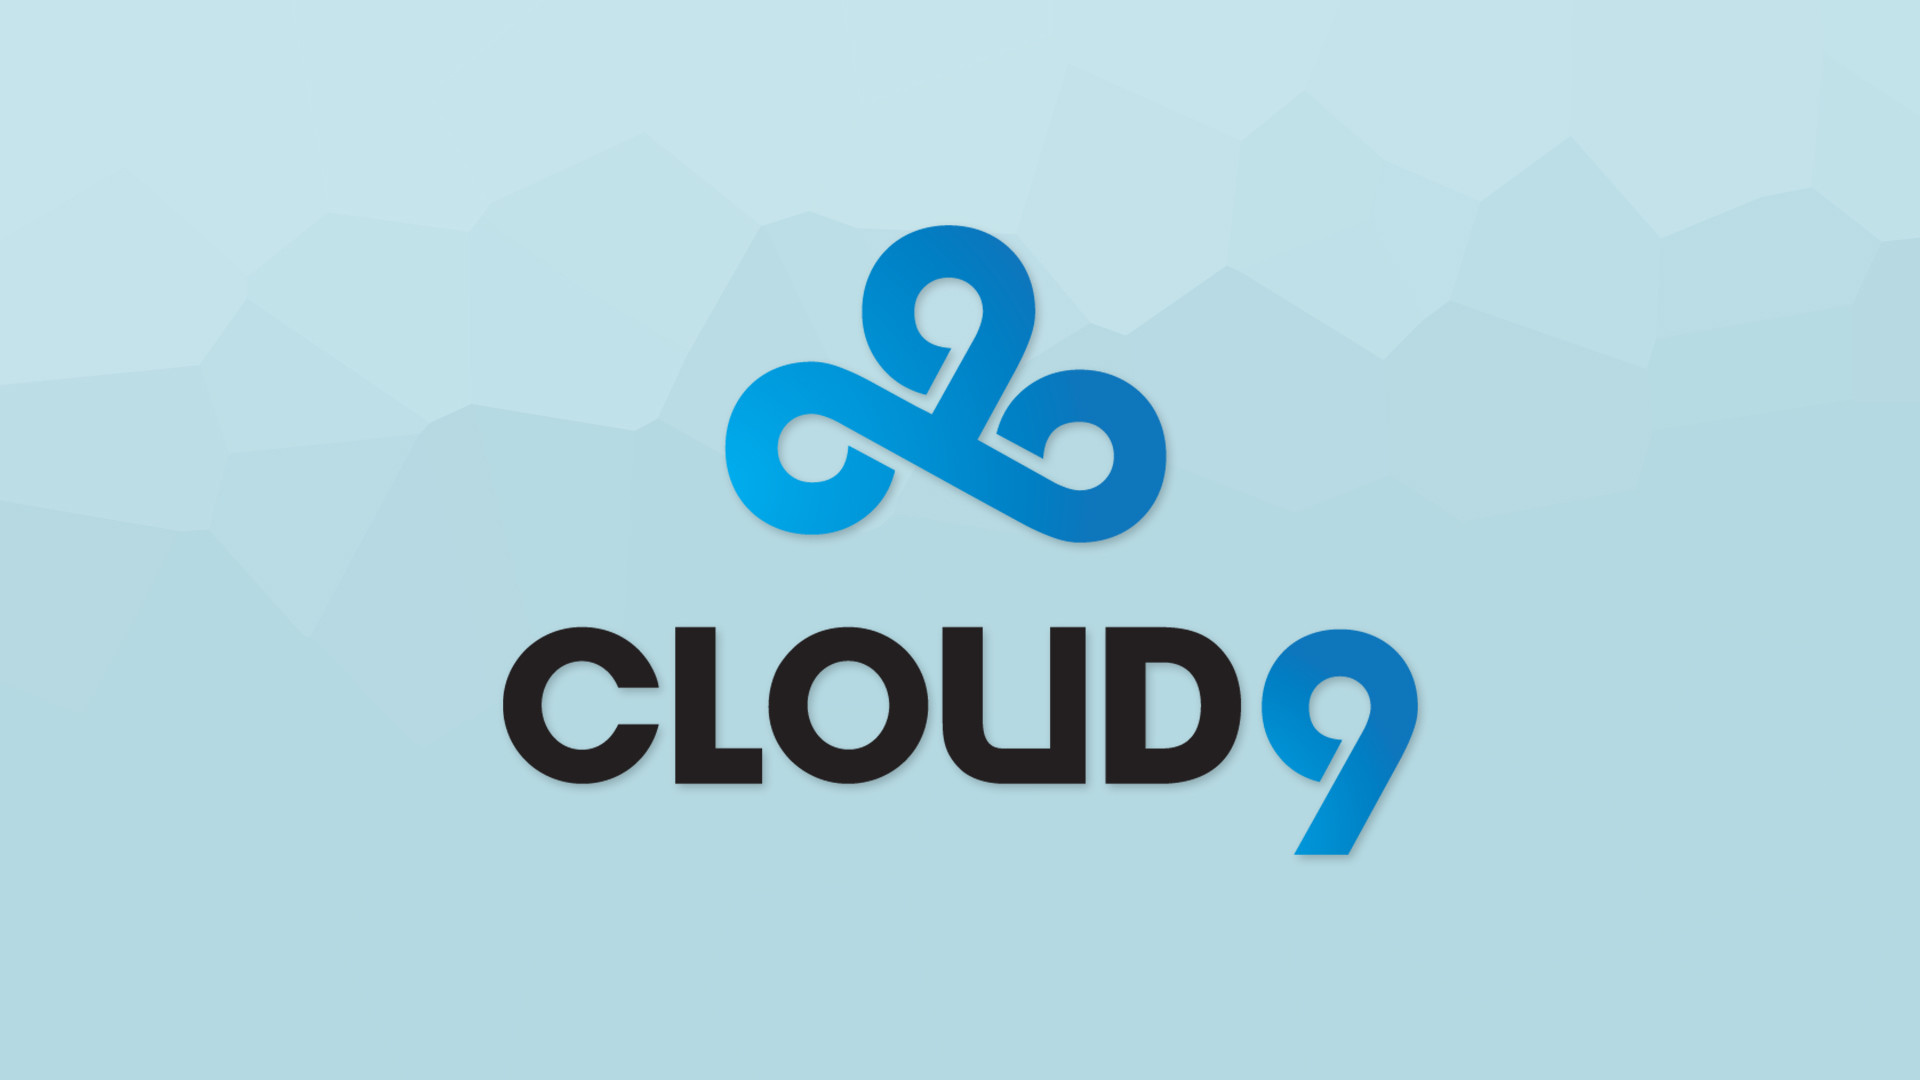 1920x1080 I made a basic Cloud 9 Wallpaper for myself, figured someone else might  want to use it too.